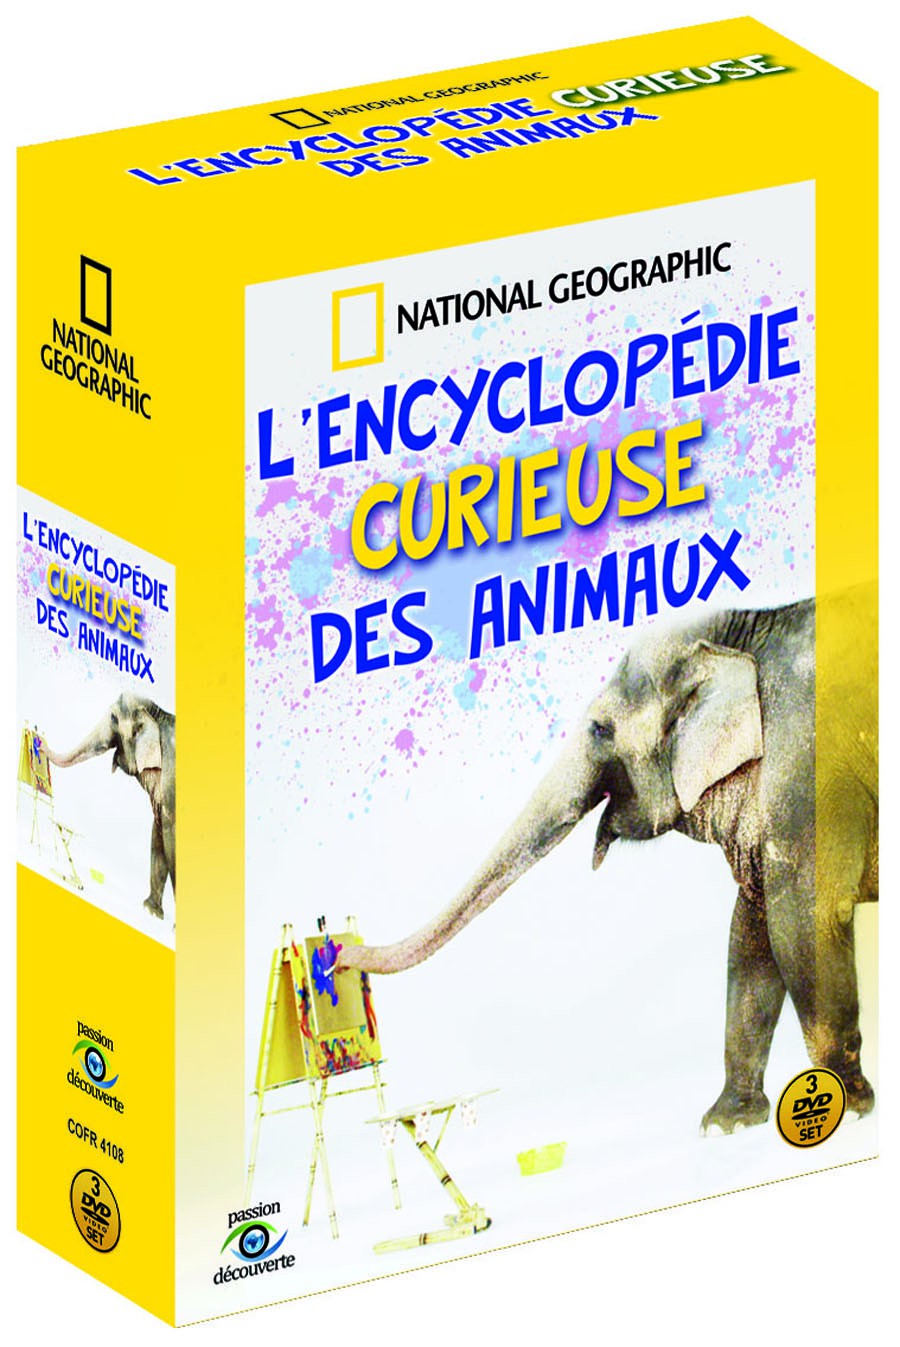 NATIONAL GEOGRAPHIC - ENCYCLOPEDIE CURIEUSE DES ANIMAUX